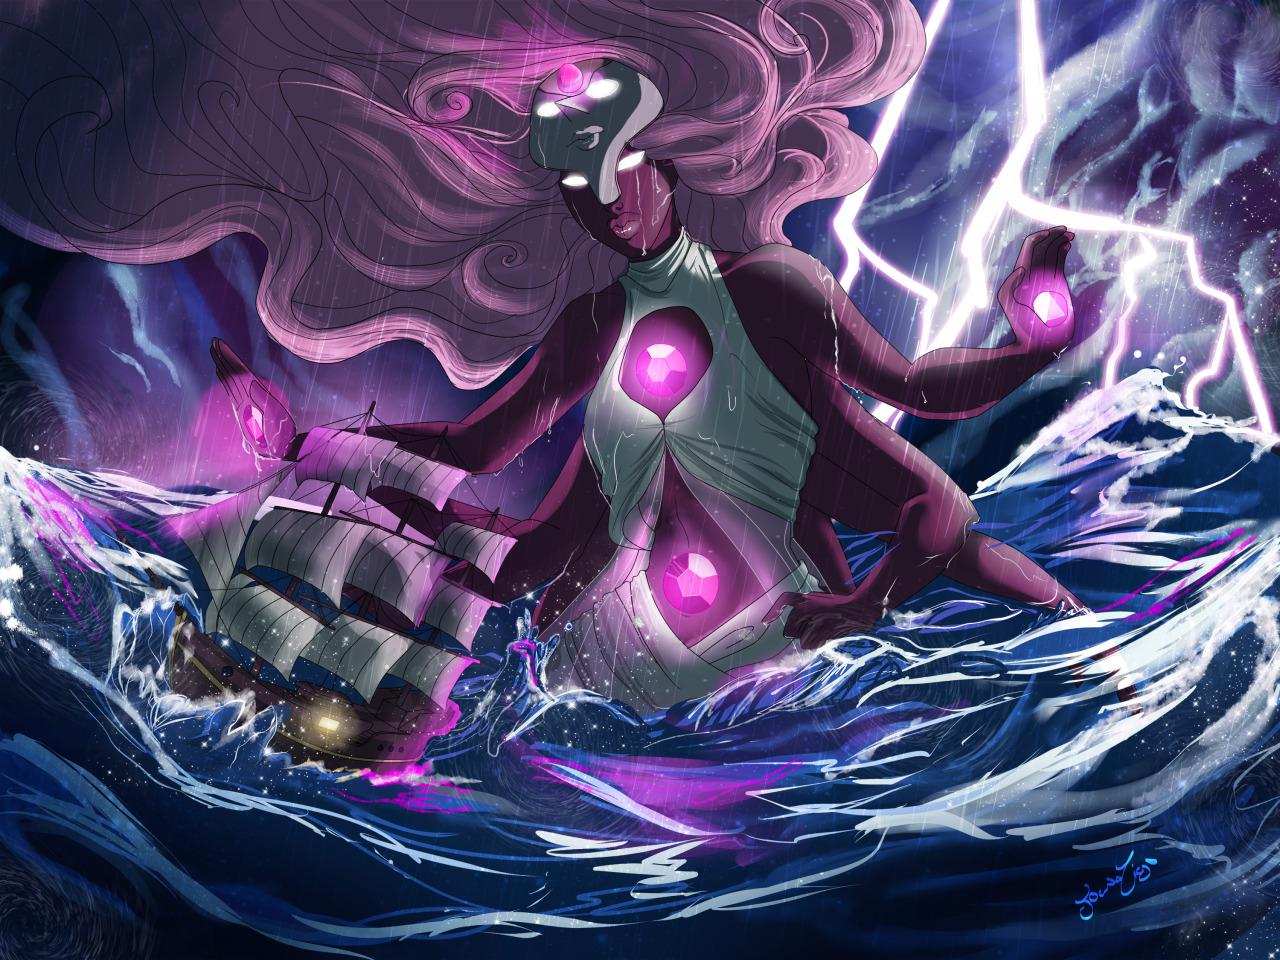 Temple Fusion saving poor humans from the raging sea. Steven